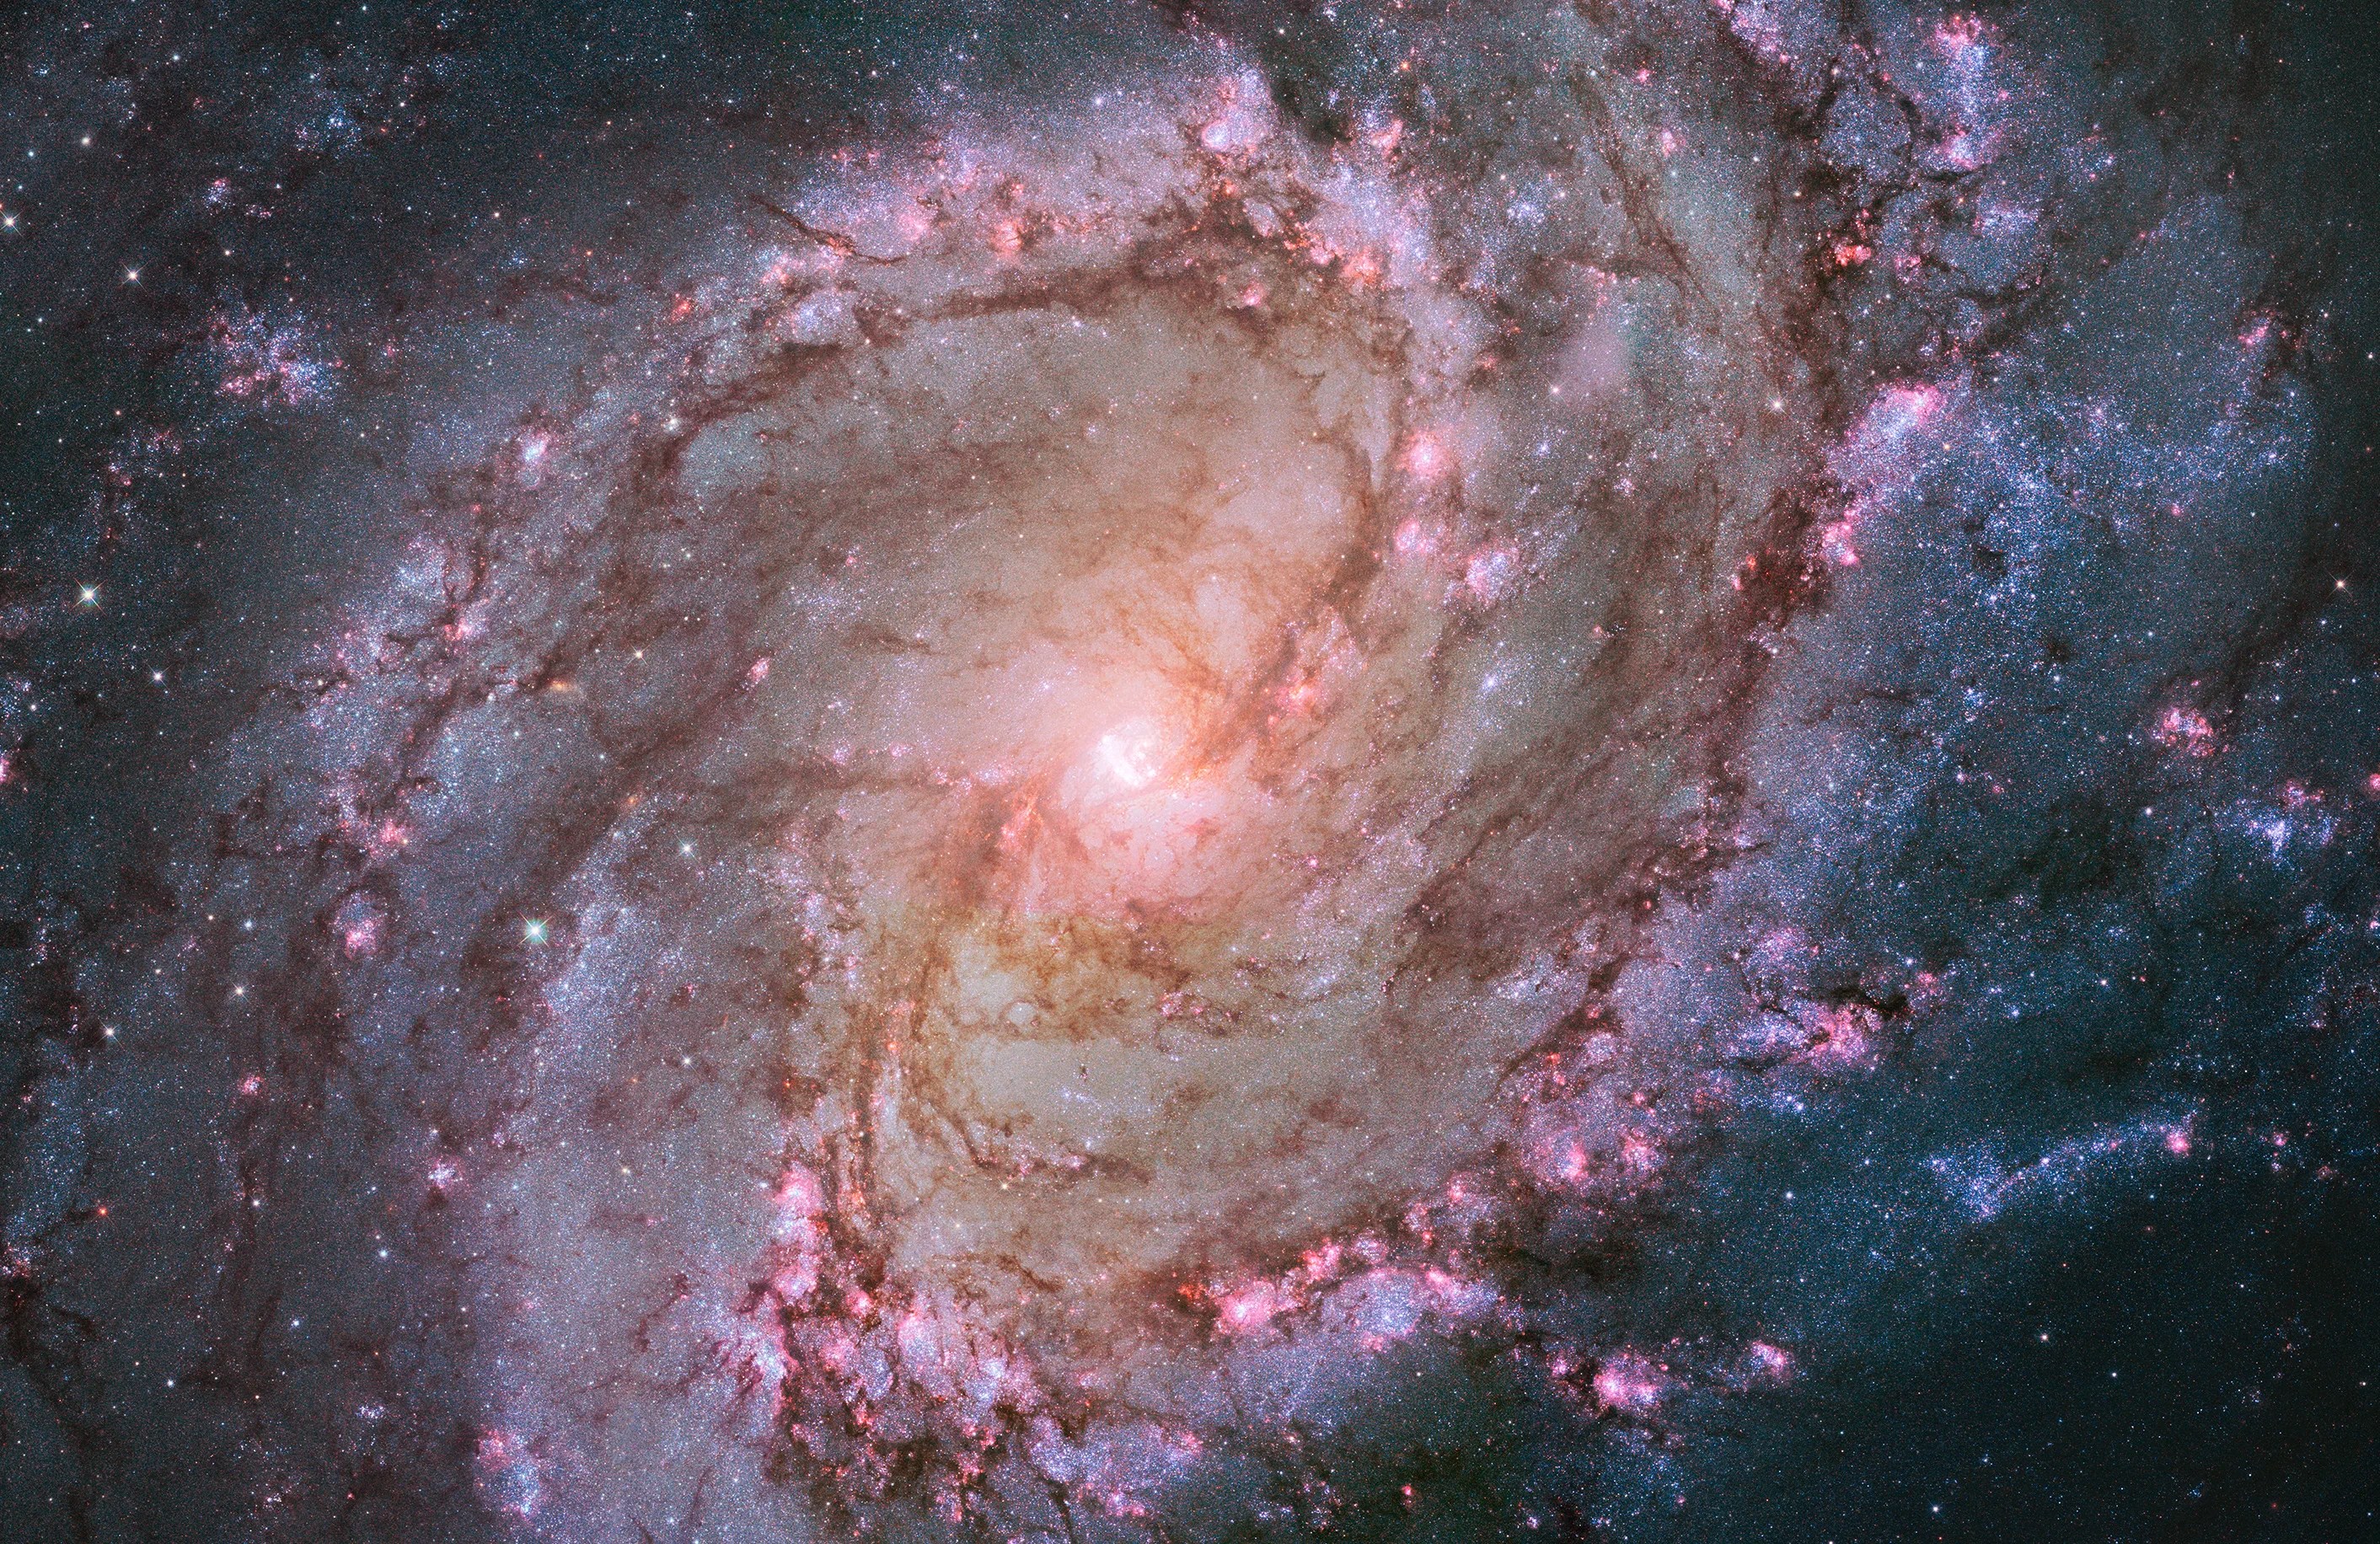 A large spiral galaxy stretches across the image, with a bright core surrounded by large spiral arms laced through with dark dust and purple and pink regions of star formation.